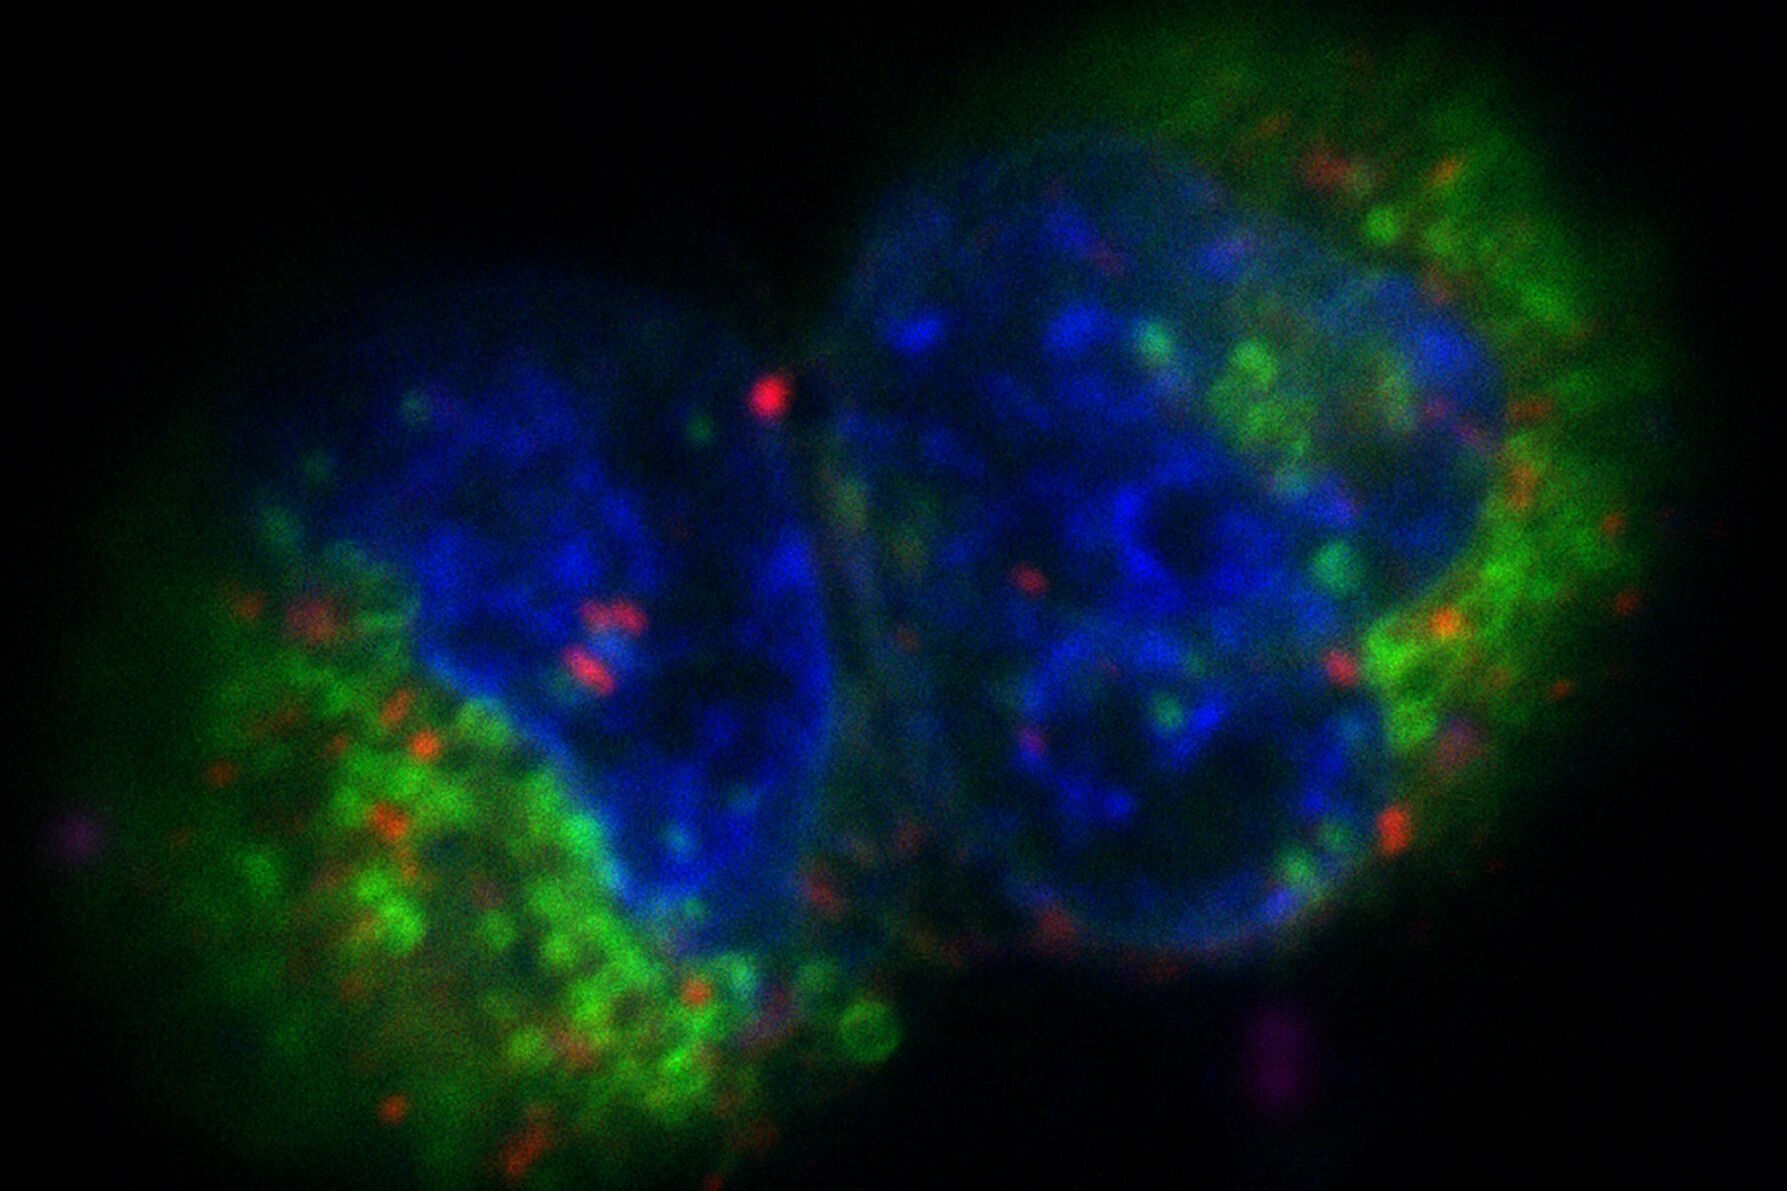 Projection of a confocal z-stack. Sum159 cells, human breast cancer cells kindly provided by Ievgeniia Zagoriy, Mahamid Group, EMBL Heidelberg, Germany. Blue–Hoechst - indicates nuclei, Green–MitoTracker Green–mitochondria, and red–Bodipy - lipid droplets